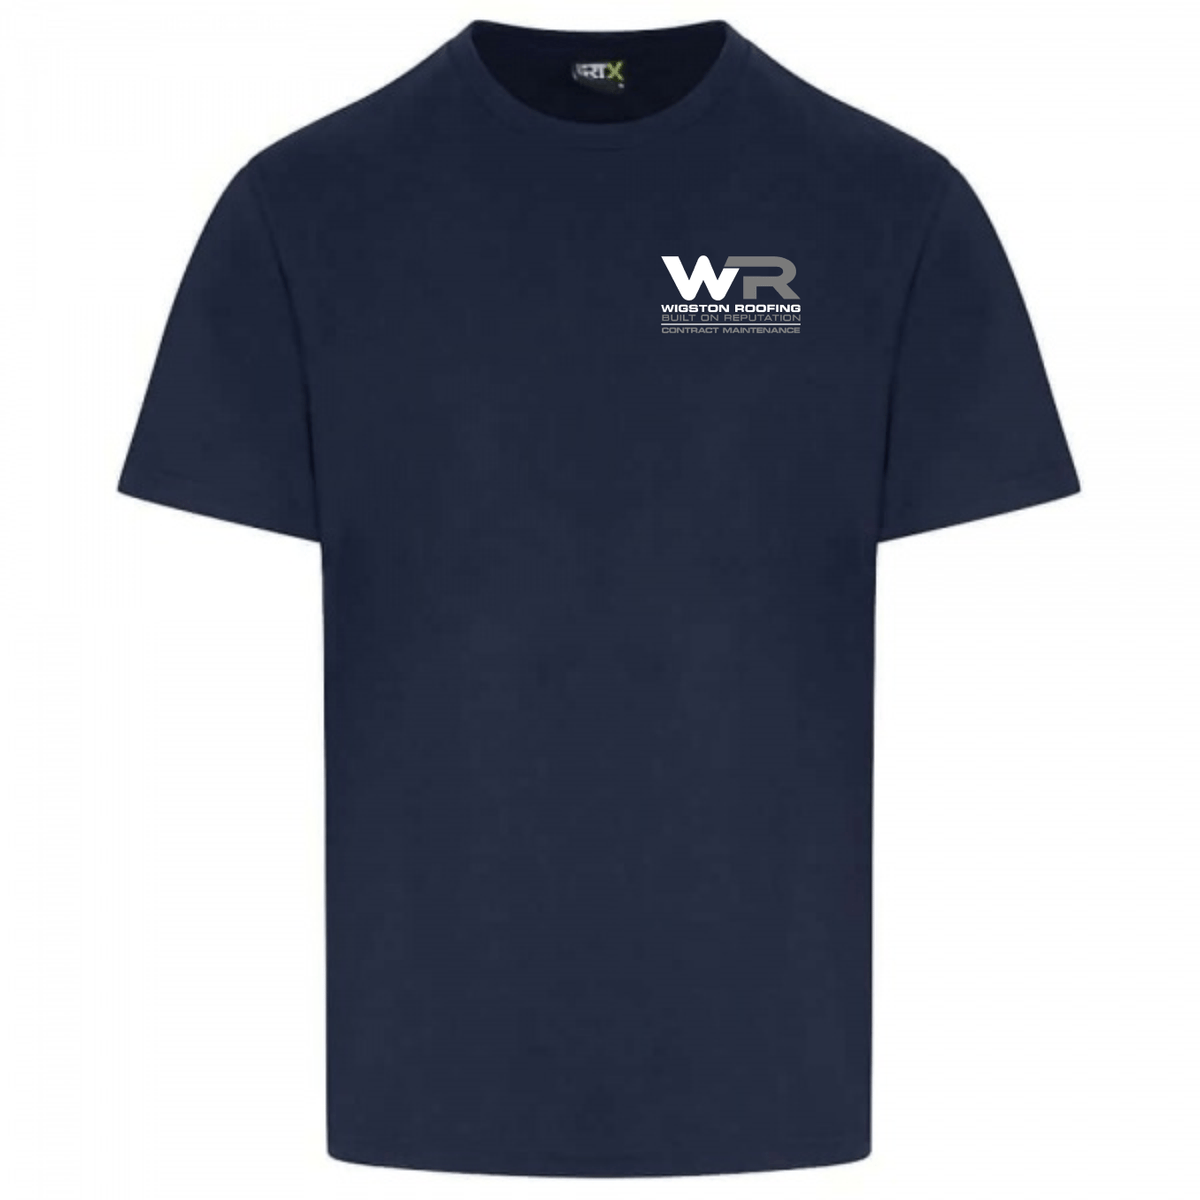 Wigston Roofing - T-Shirt (RX151)